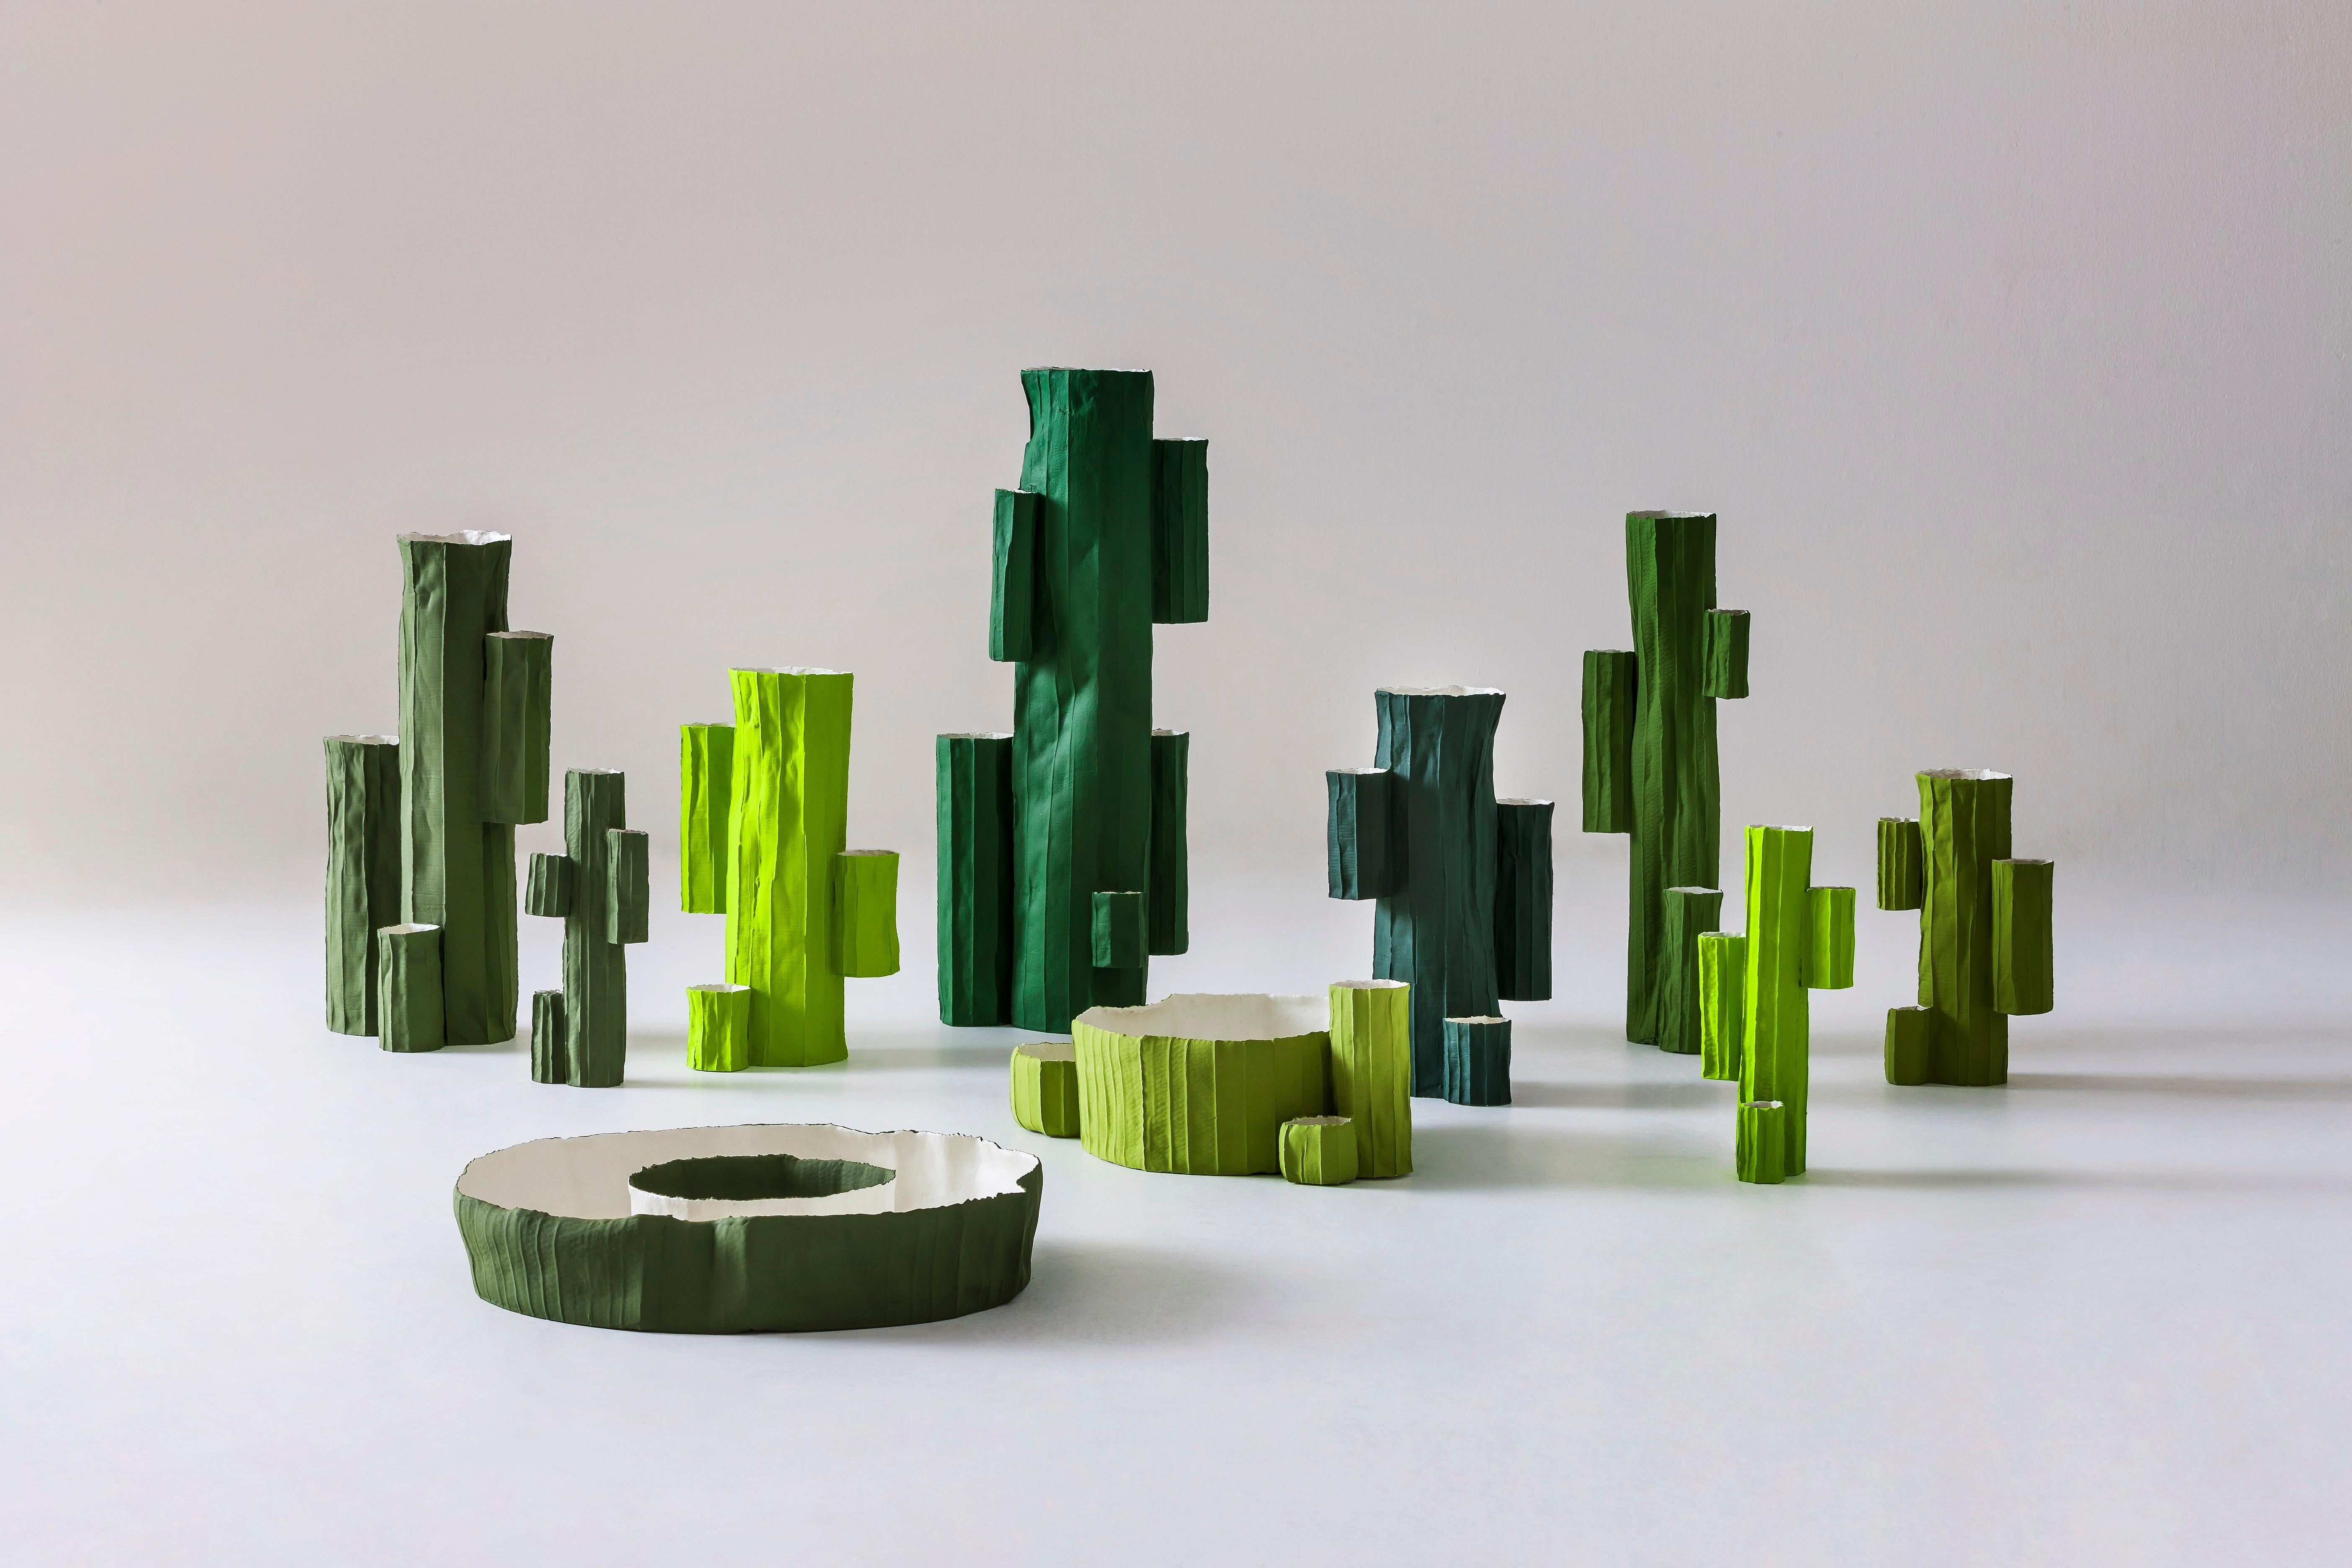 Italian ceramist Paola Paronetto's Cactus series of decorative objects draws inspiration from the beauty and harmony in nature. Handcrafted of paper clay, a special material obtained by mixing paper pulp and particles of vegetable fibers to the